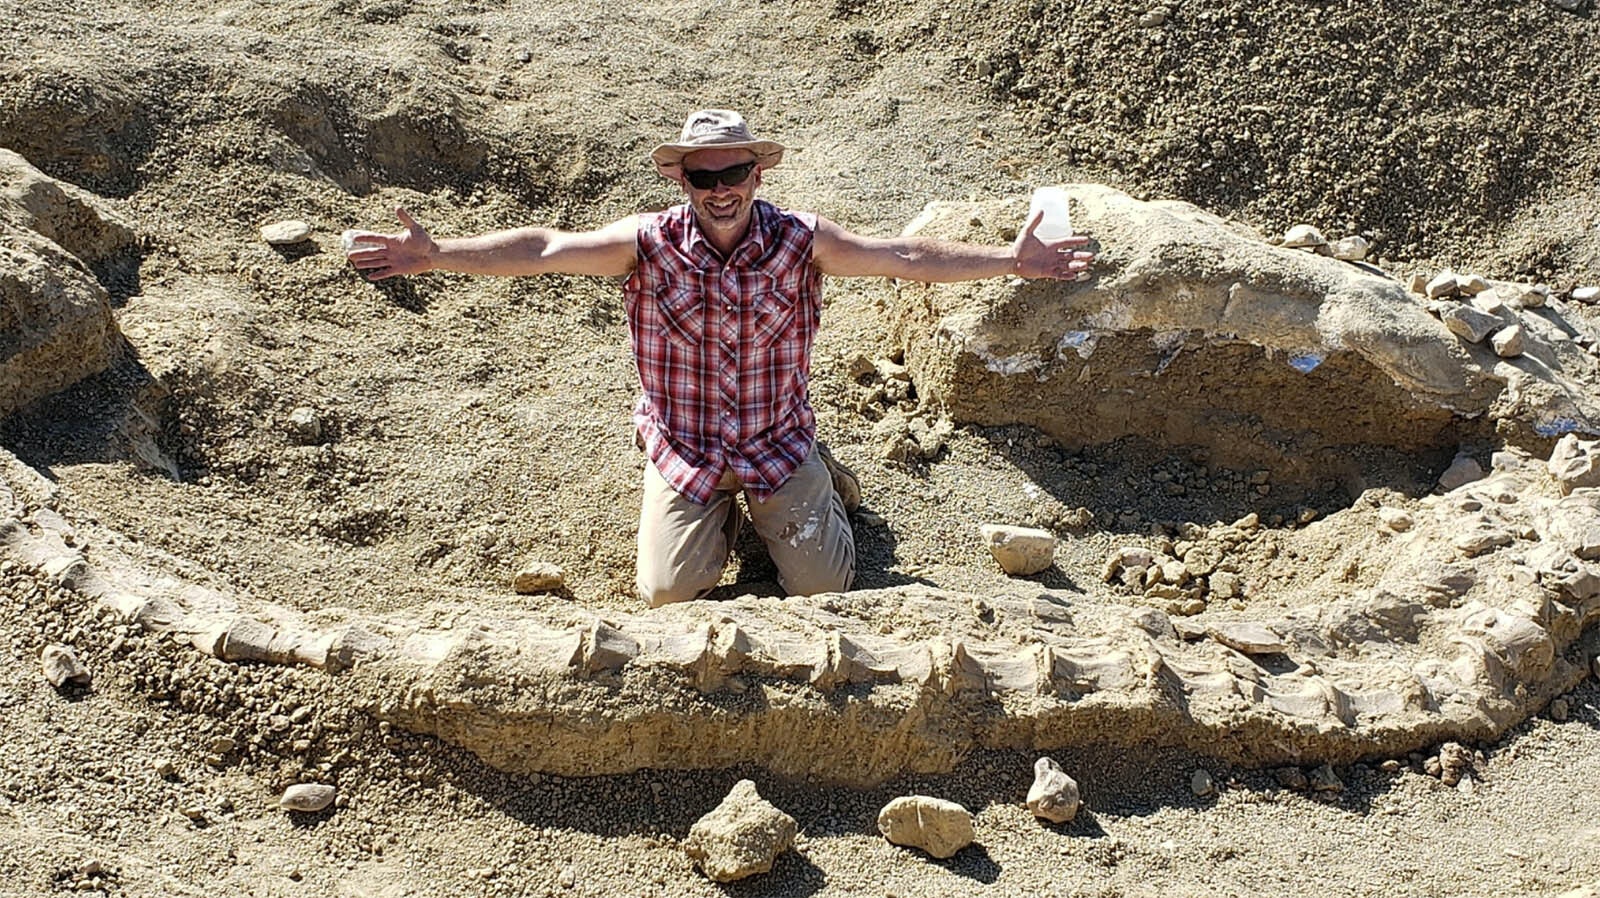 Paleontologist Jason Schein, executive director of Elevation Science Institute, shows off the articulated tail of a 150-million-year-old long-necked sauropod from the Late Jurassic Period. The tail is among thousands of other dinosaur bones found in the Anderson Site on the Montana side of the Bighorn Basin near Bridger, Montana.